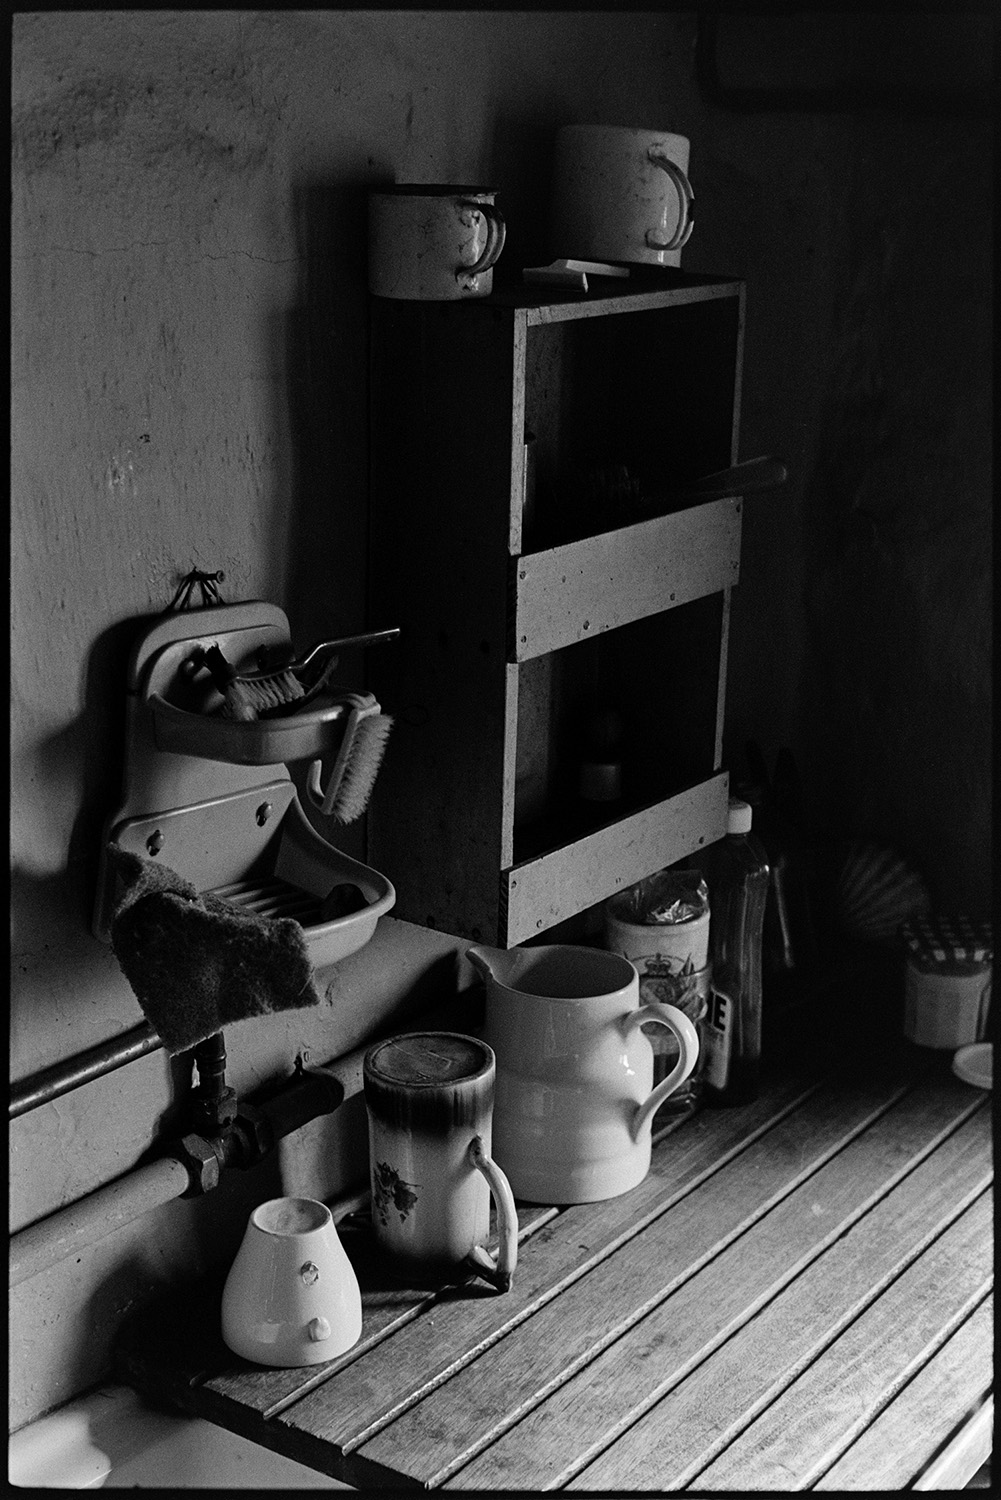 Interior of kitchen, gas boiler, utensils etc. 
[The interior of the kitchen at Bottreaux Mill, Molland with jugs and brushes on a wooden worktop next to a sink.]